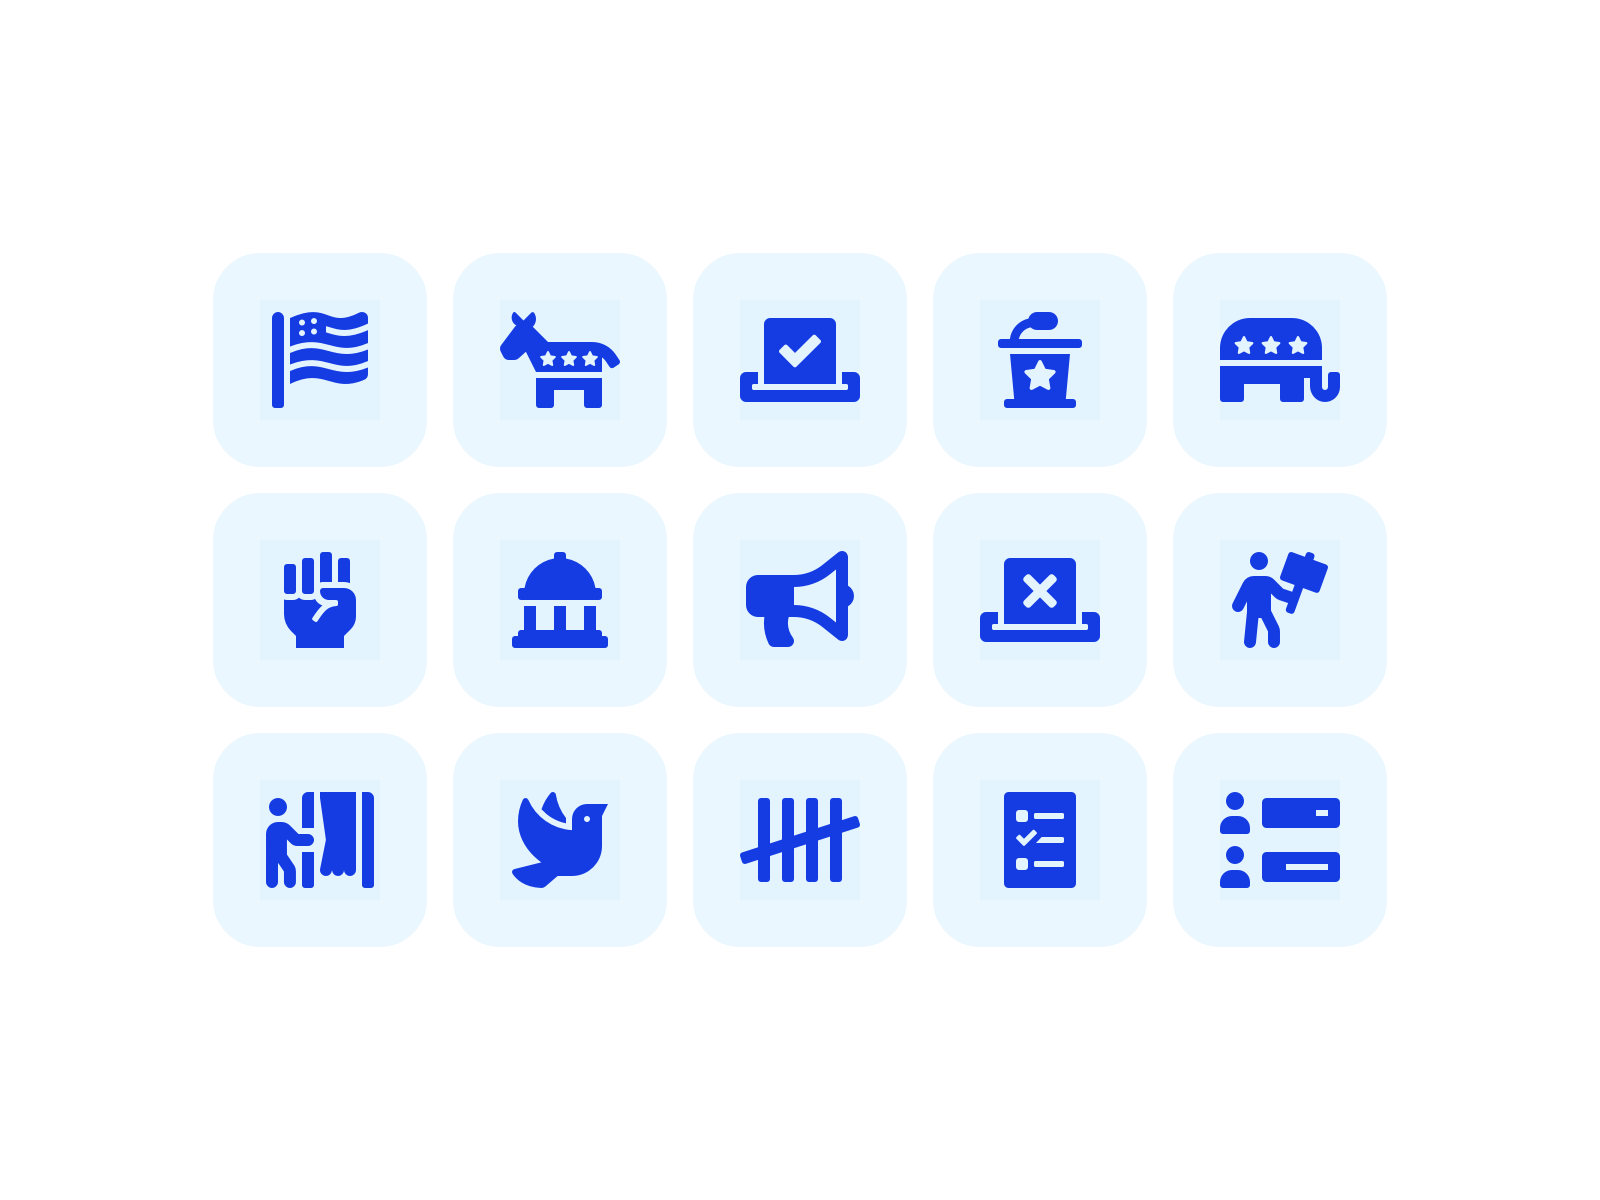 Political Icons by Jory Raphael for Font Awesome on Dribbble